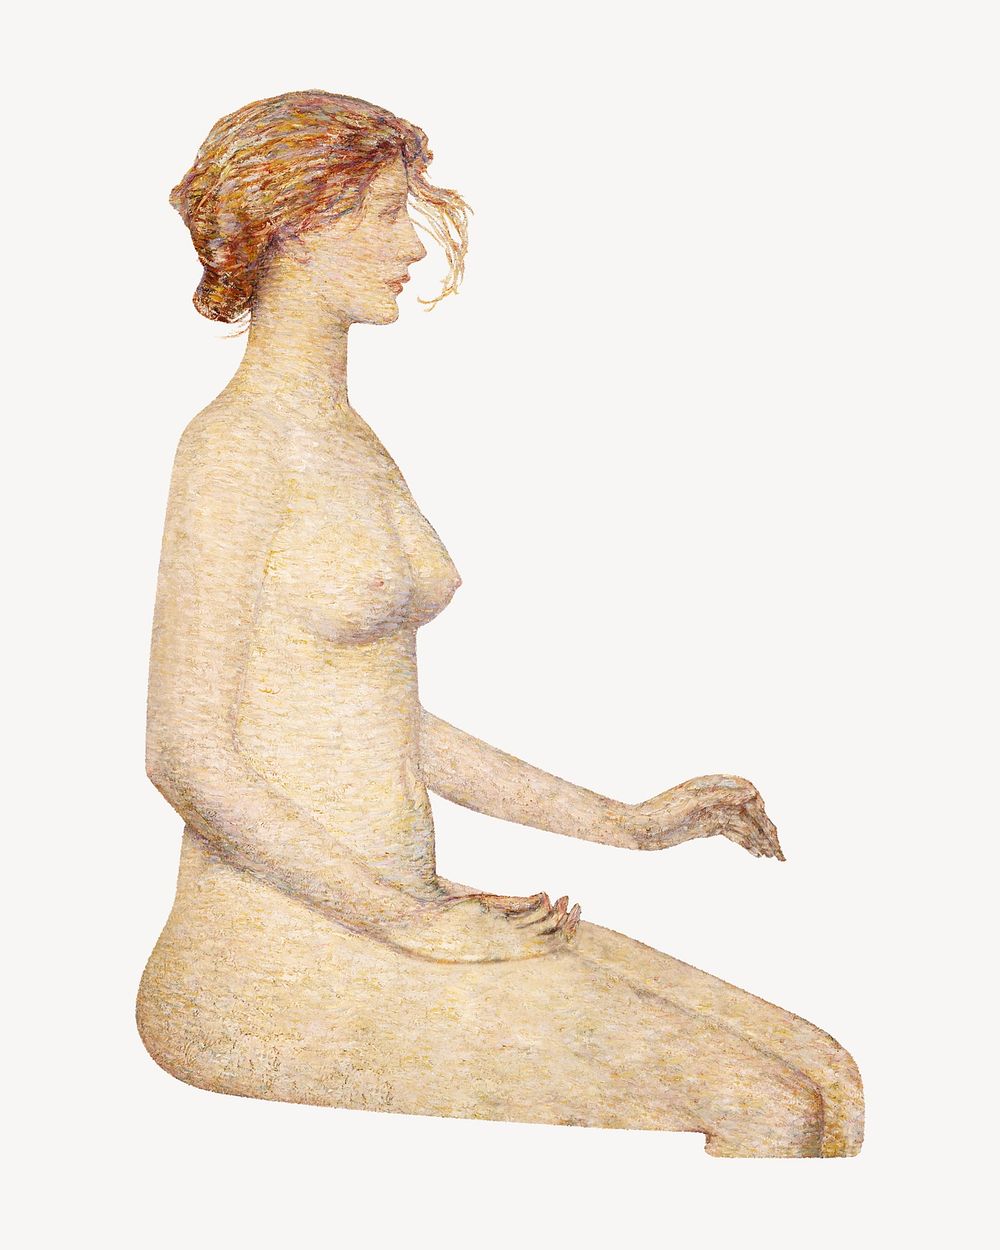 Nude woman sitting, vintage illustration by Frederick Childe Hassam. Remixed by rawpixel.